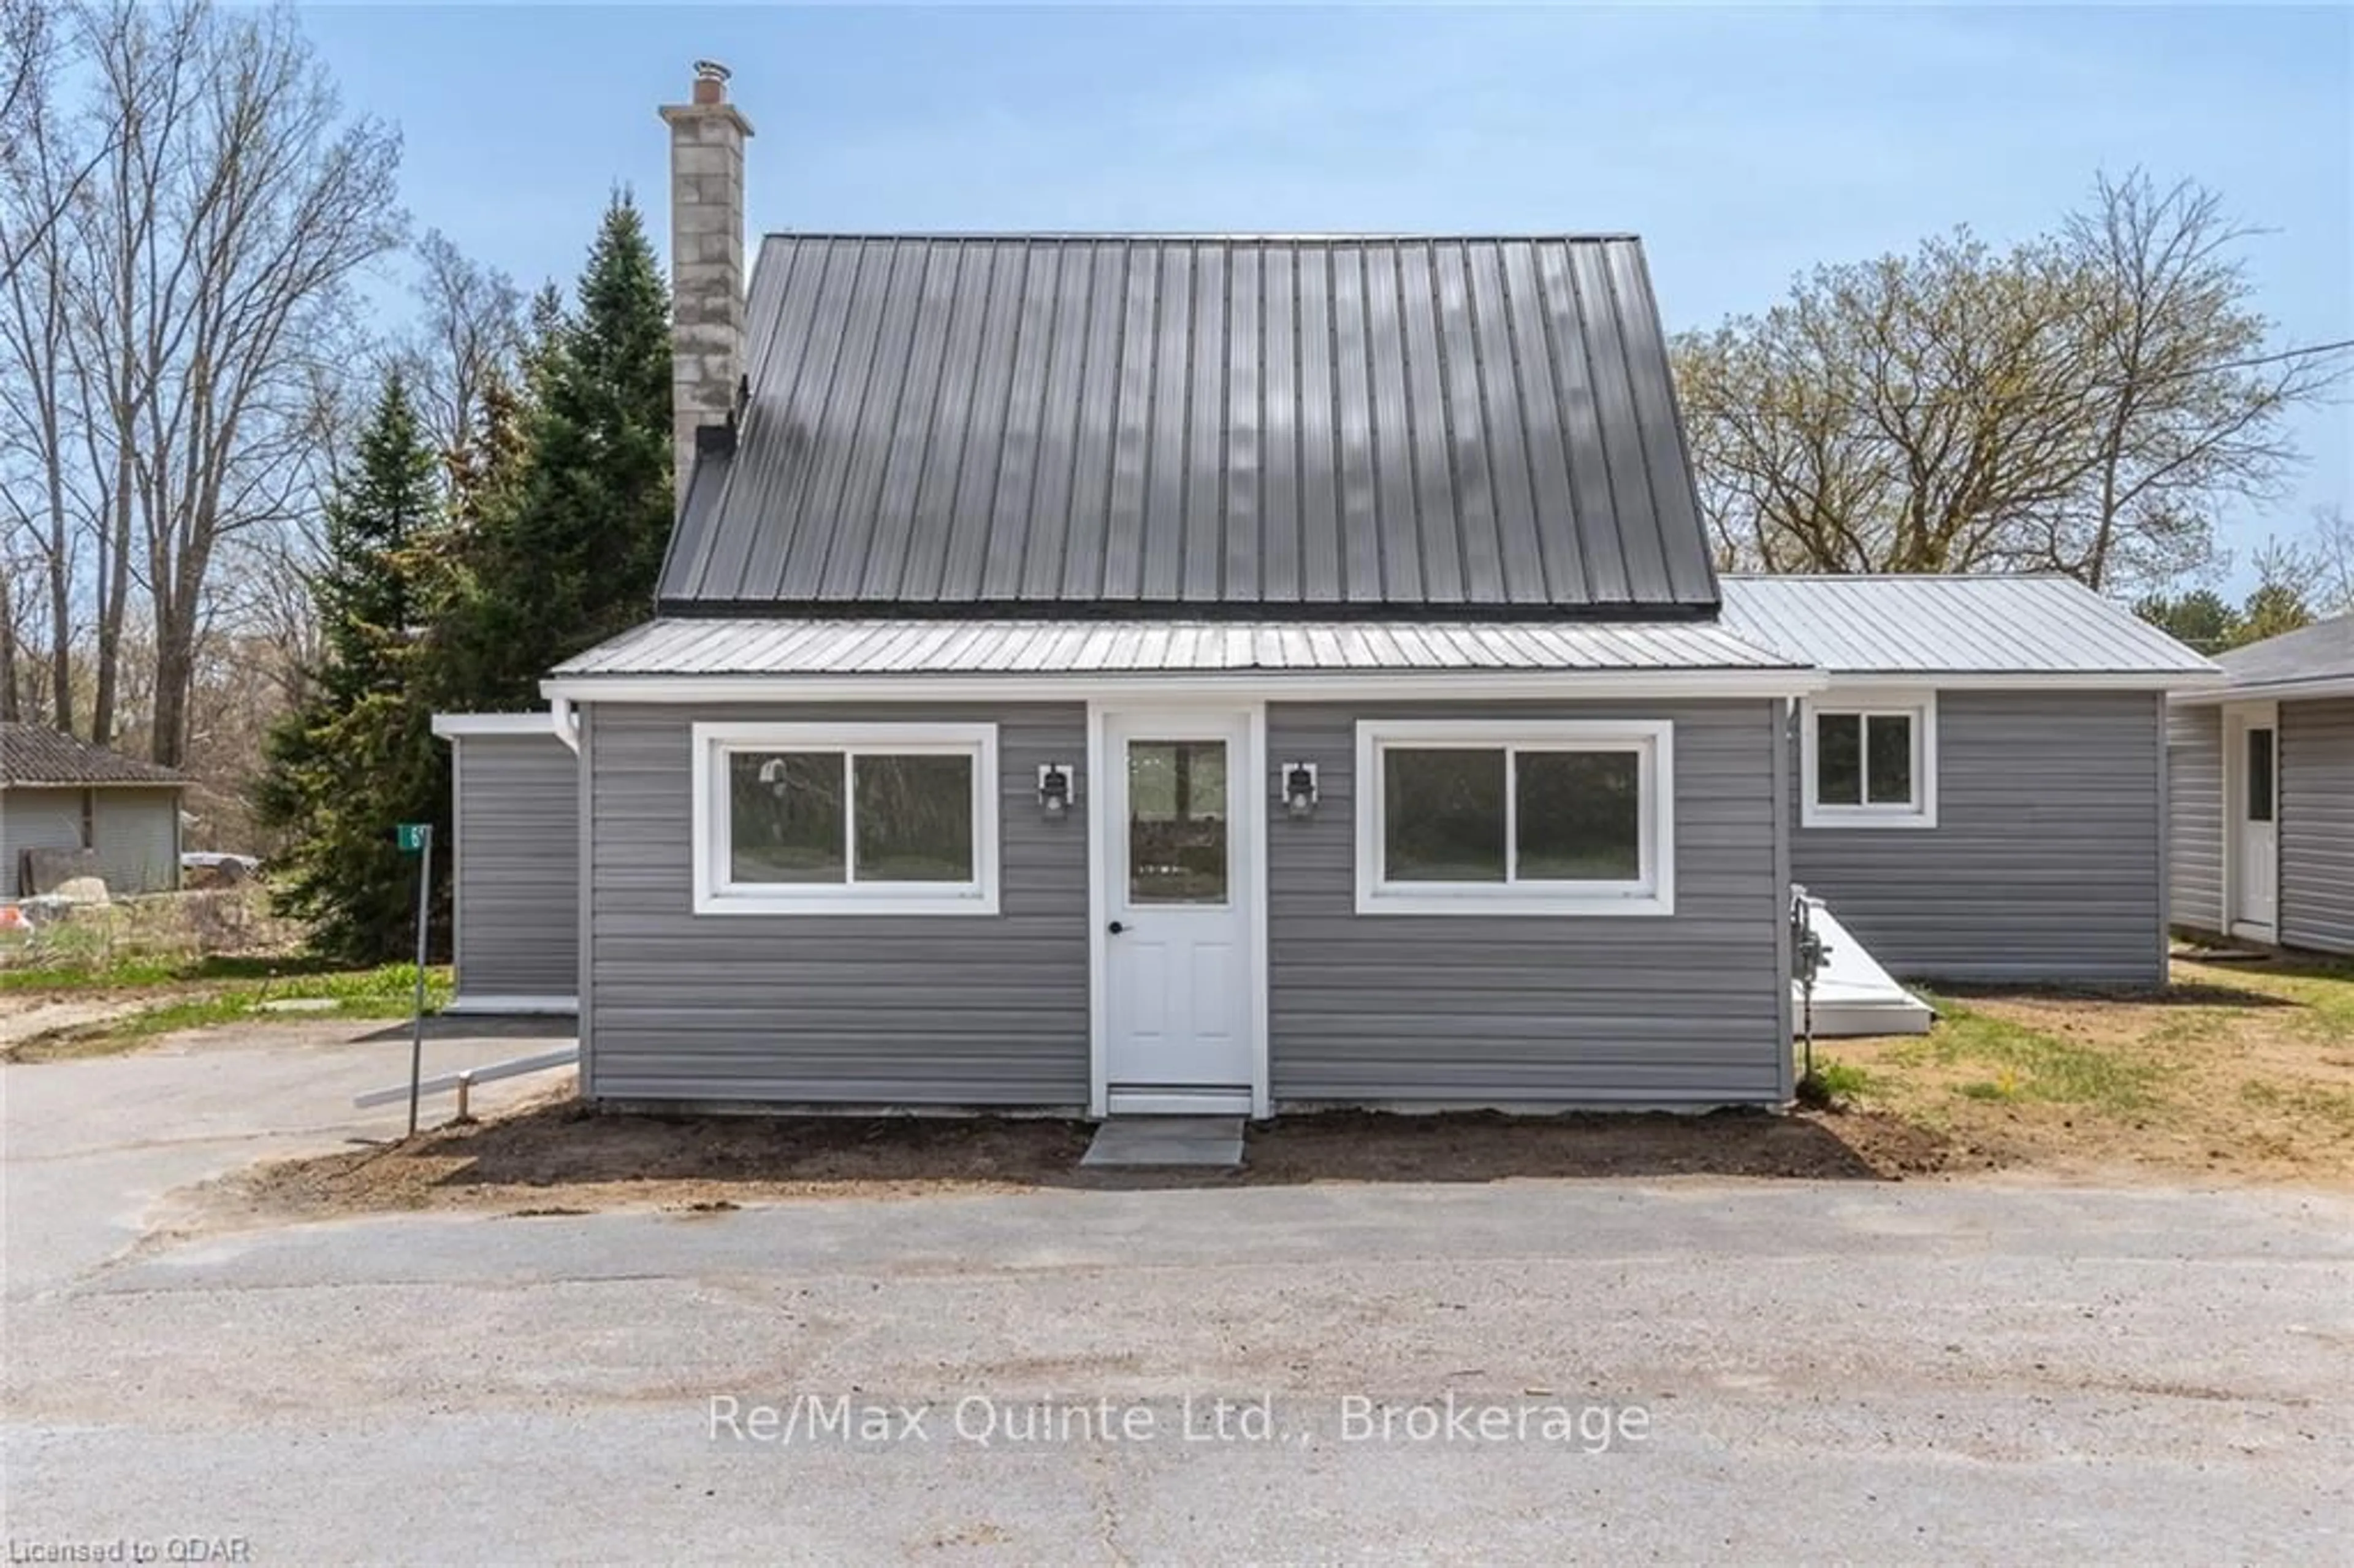 Cottage for 61 County Road 1 Rd, Prince Edward County Ontario K0K 2T0